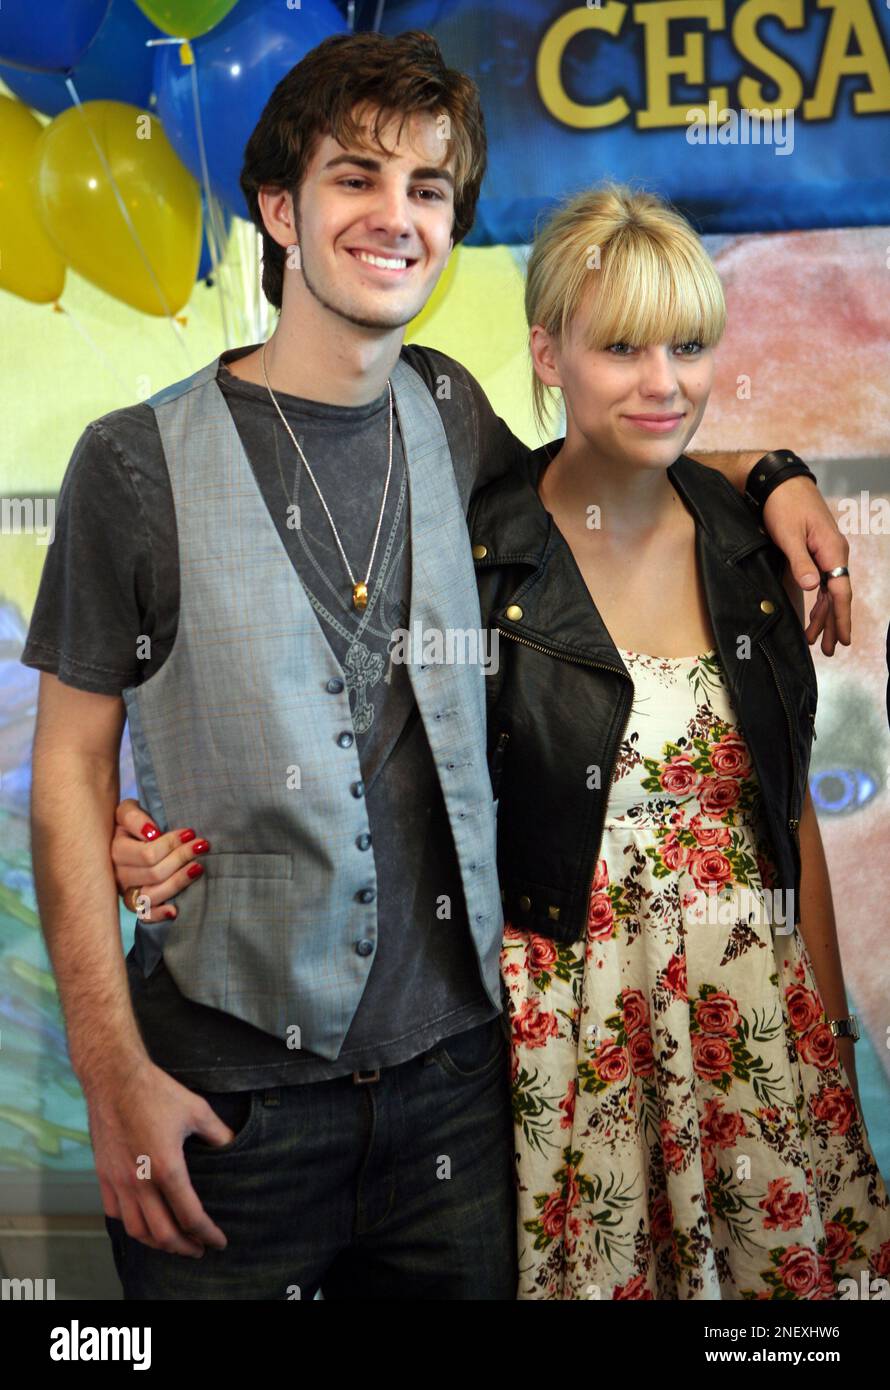 Cast members from the television movie Scooby-Doo, Nick Palatas and Kate Melton attend a 40th brithday celebration for cartoon character Scooby-Doo and host of 'Dog Cesar Millan, not seen in